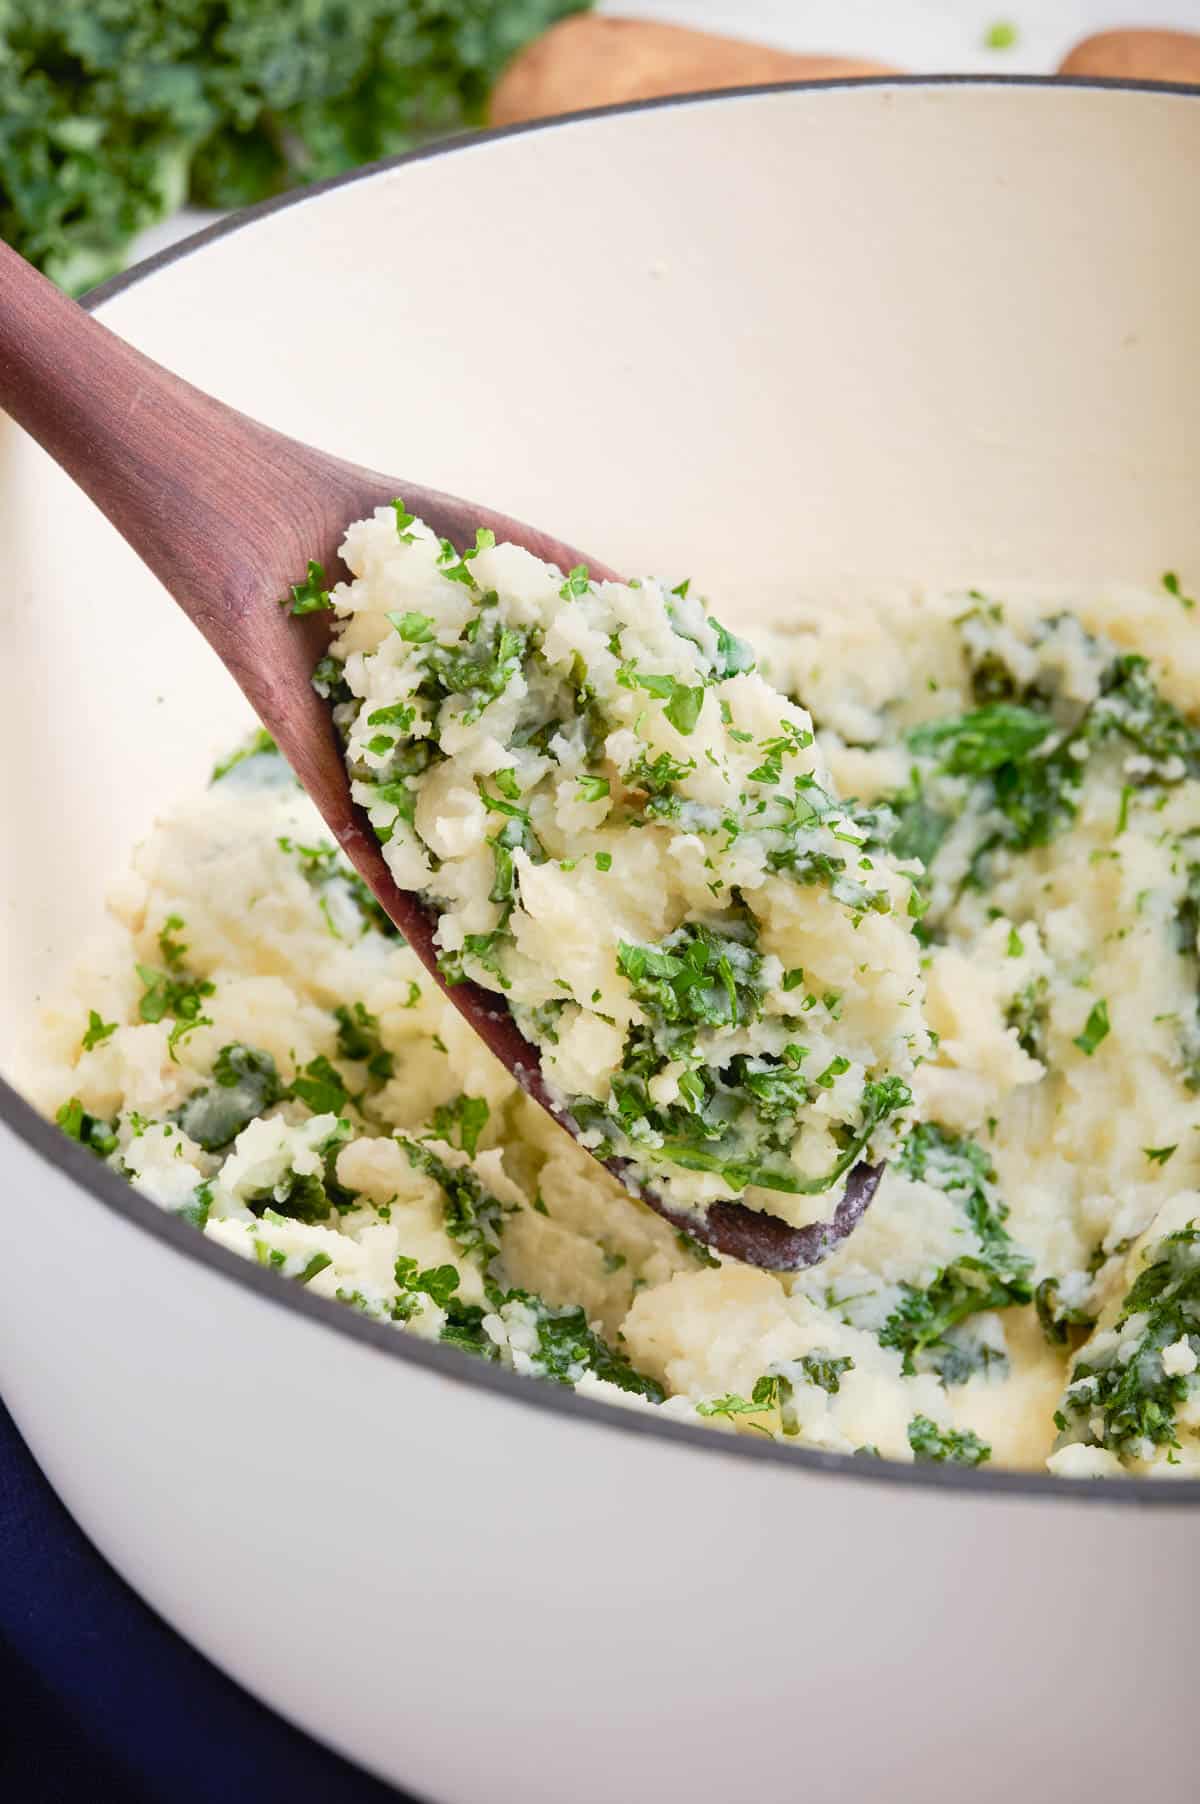 A wooden spoon scoops out a serving of Irish mashed potatoes.